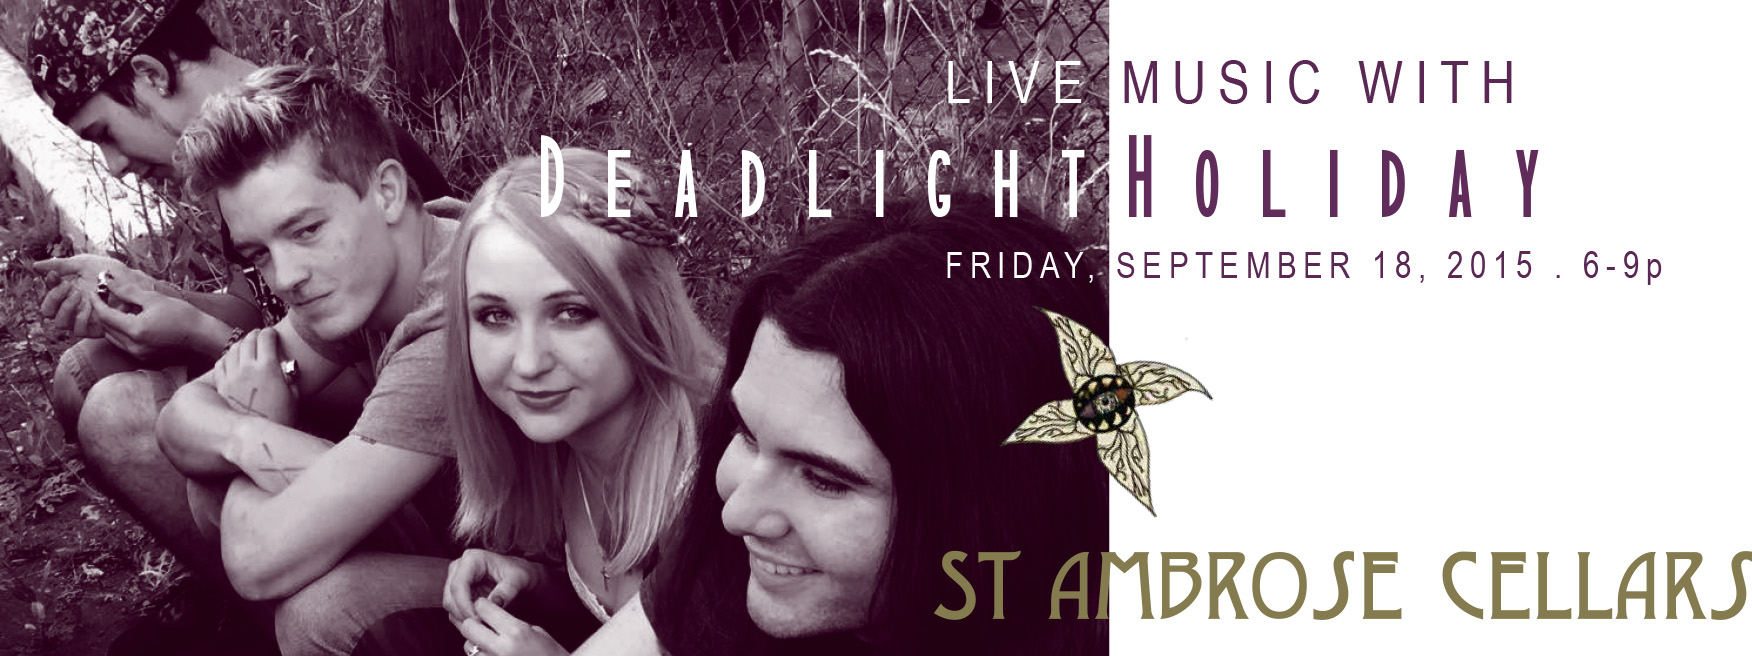 Deadlight Holiday : Live Music at St. Ambrose!